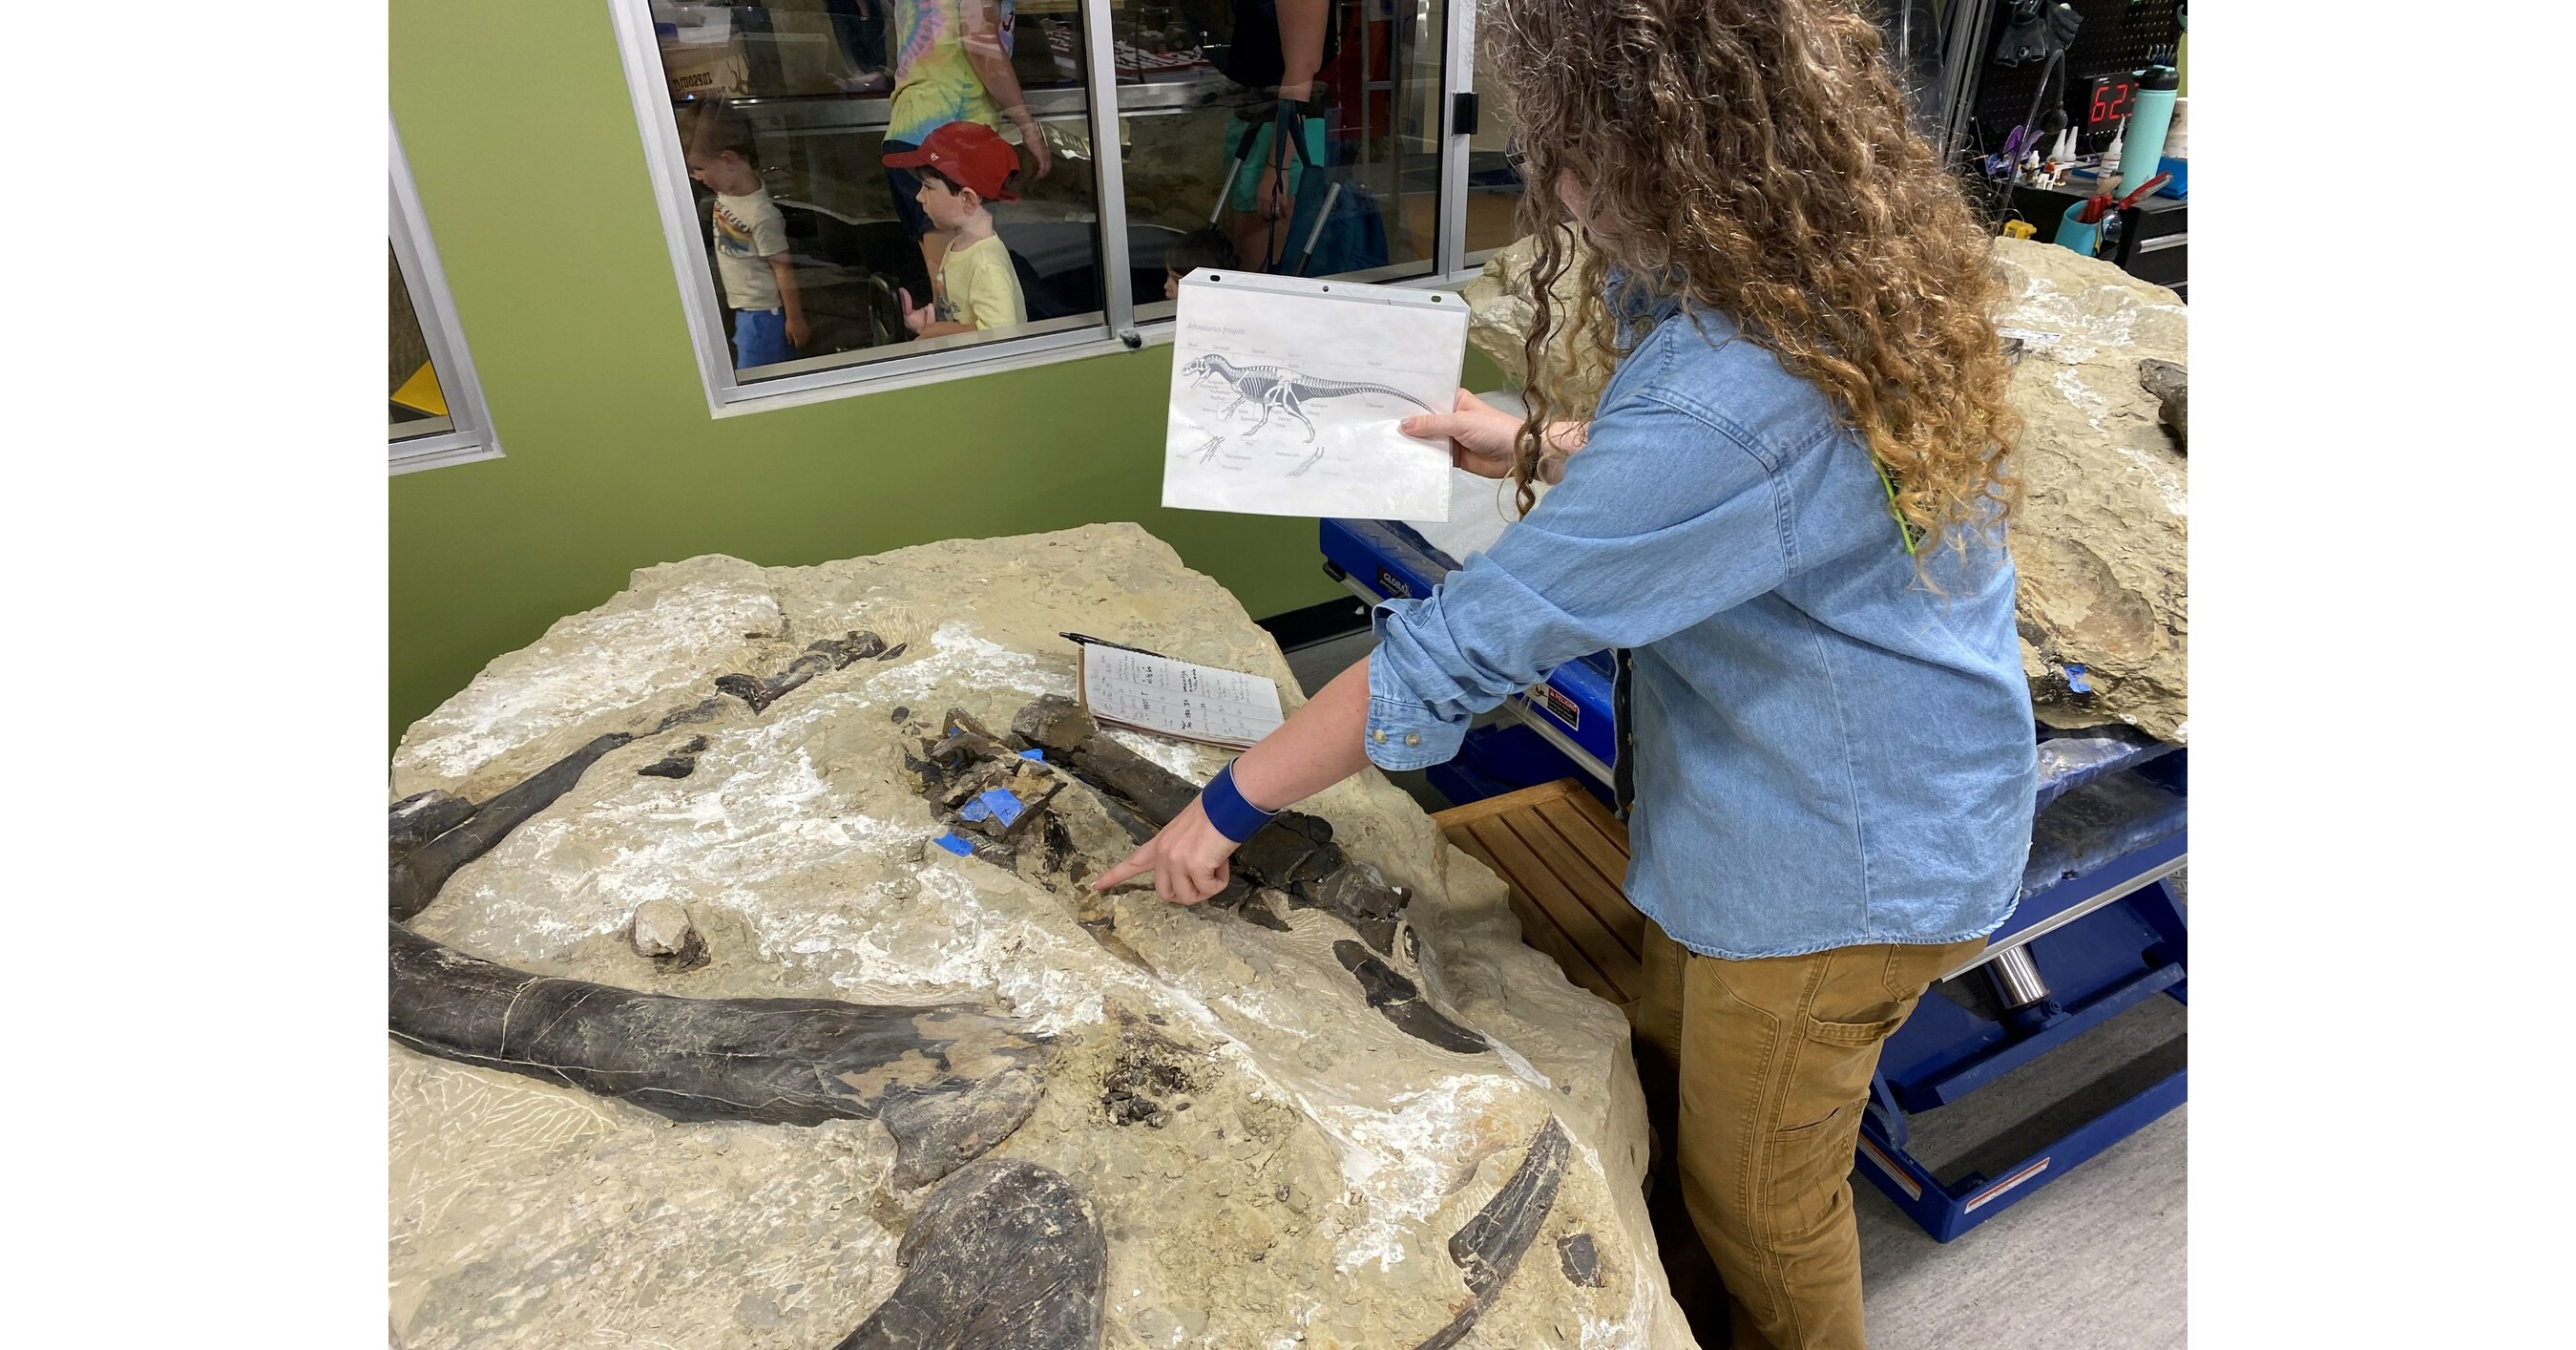 Groundbreaking Allosaurus Discovery Revealed at Jurassic Mile® Dig Site in Wyoming Is Now on Display at The Children's Museum of Indianapolis